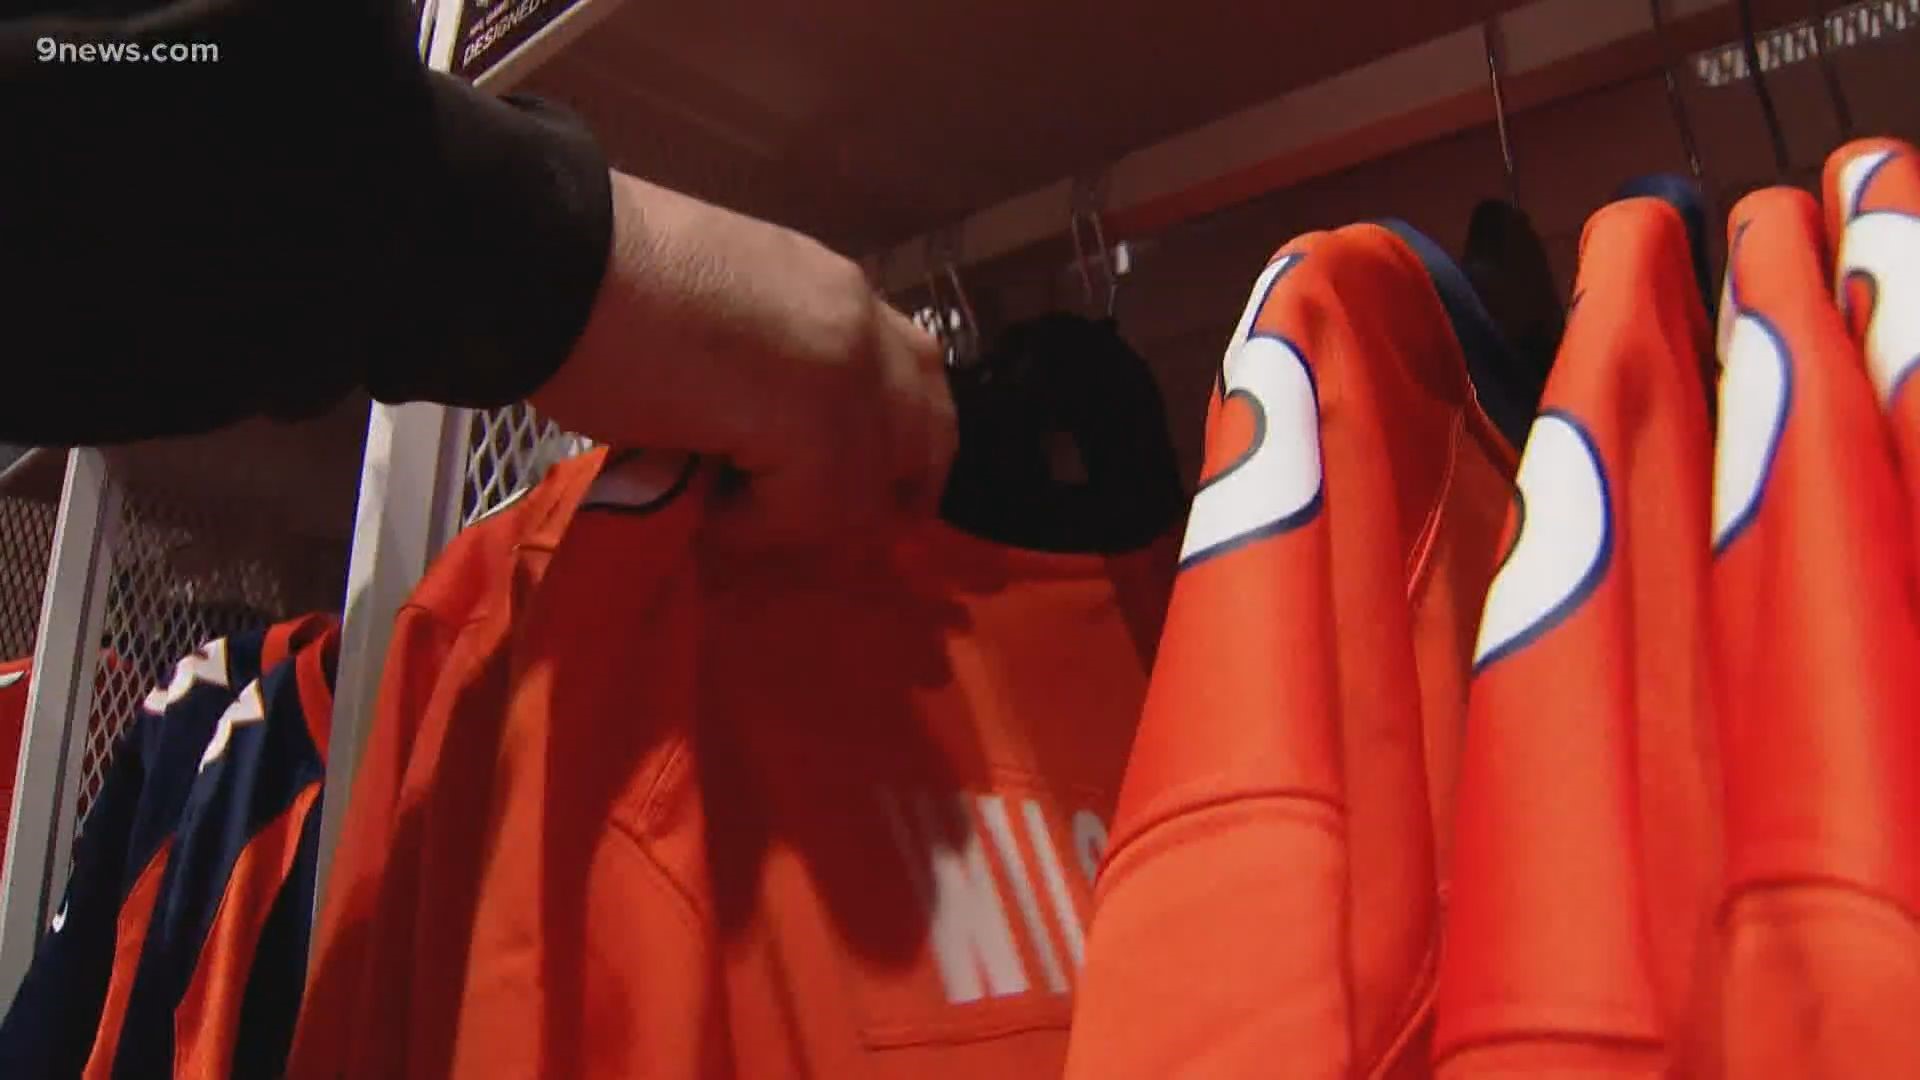 A limited number of Russell Wilson jerseys arrived at Broncos team stores as he was officially introduced Wednesday. They sold out within hours.